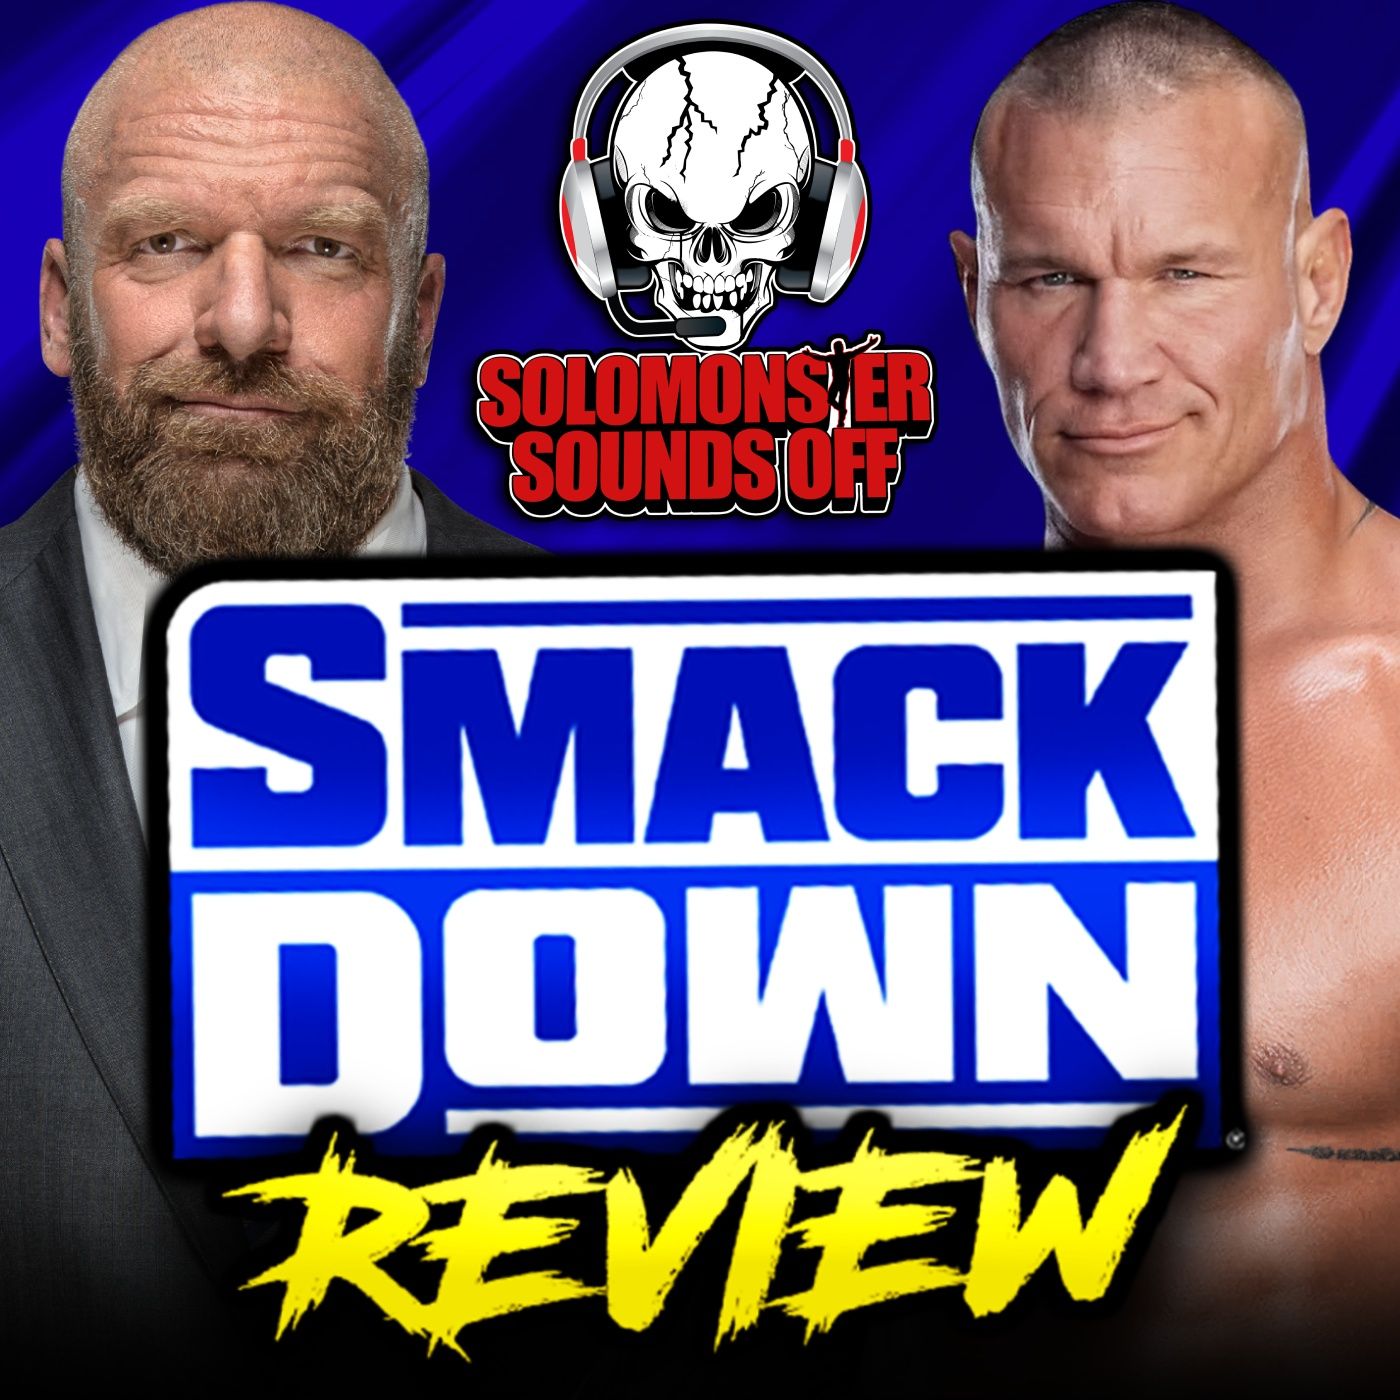 WWE Smackdown 4/19/24 Review - FORMER WWE CHAMPION RELEASED, CODY GETS HIS FIRST CHALLENGER